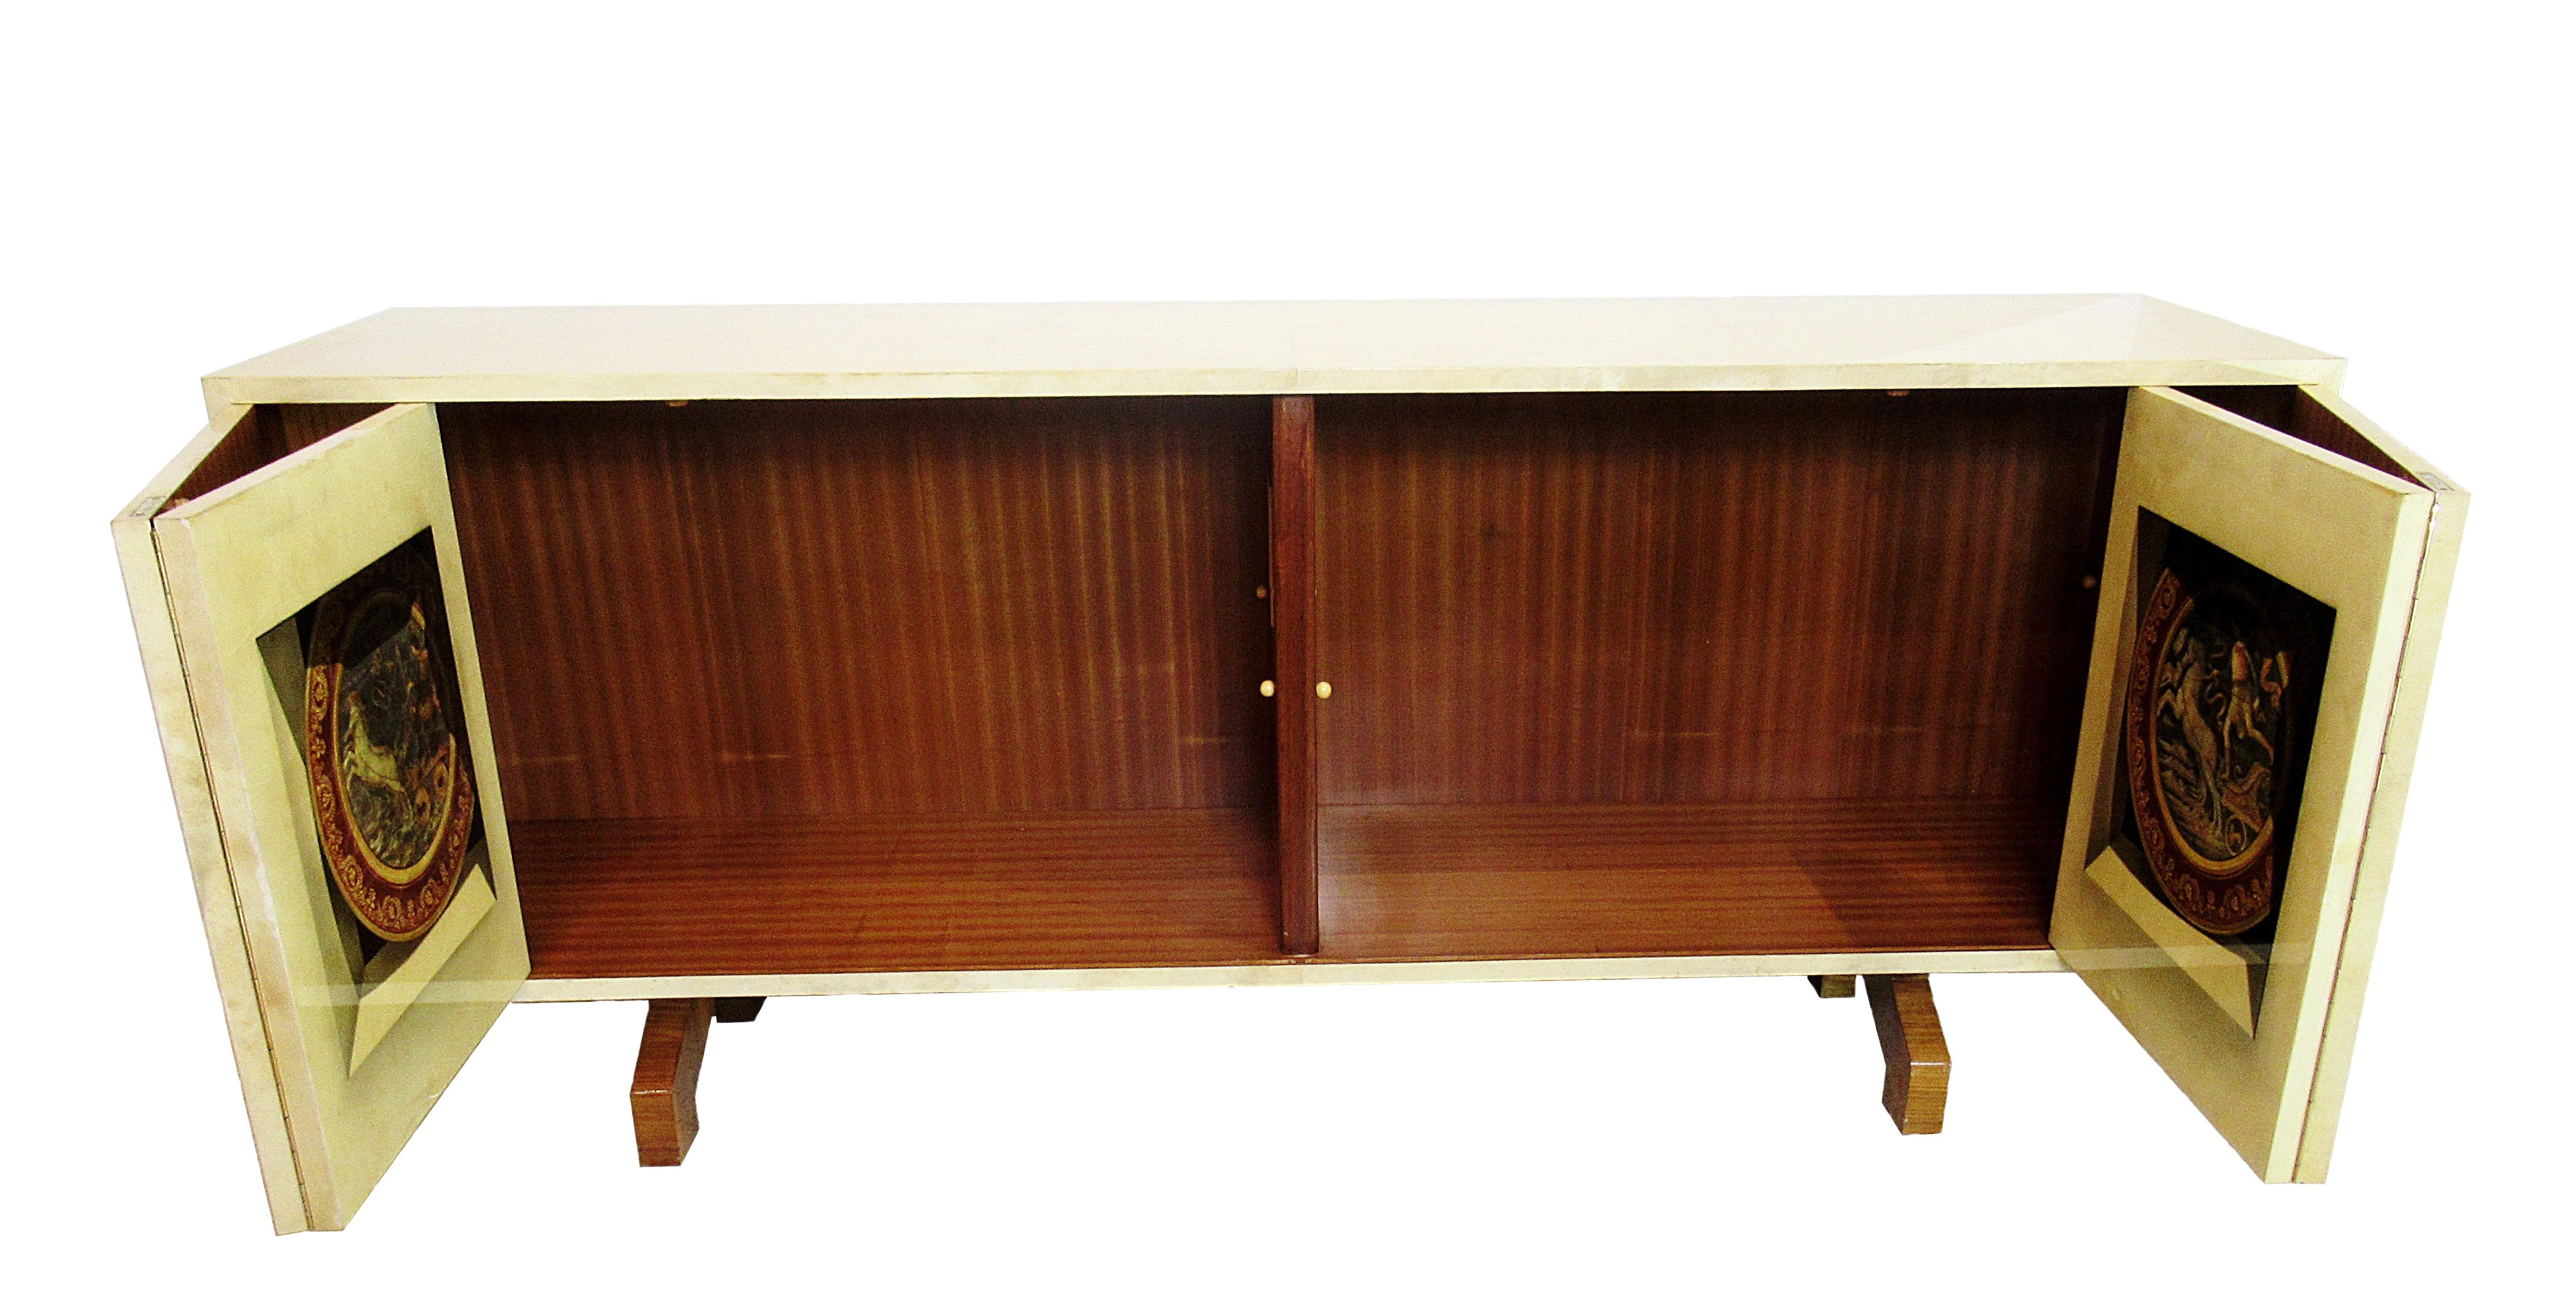 Italian Modern Parchment, Palisander and Trompe L'oeil Credenza, Aldo Tura In Excellent Condition For Sale In Hollywood, FL